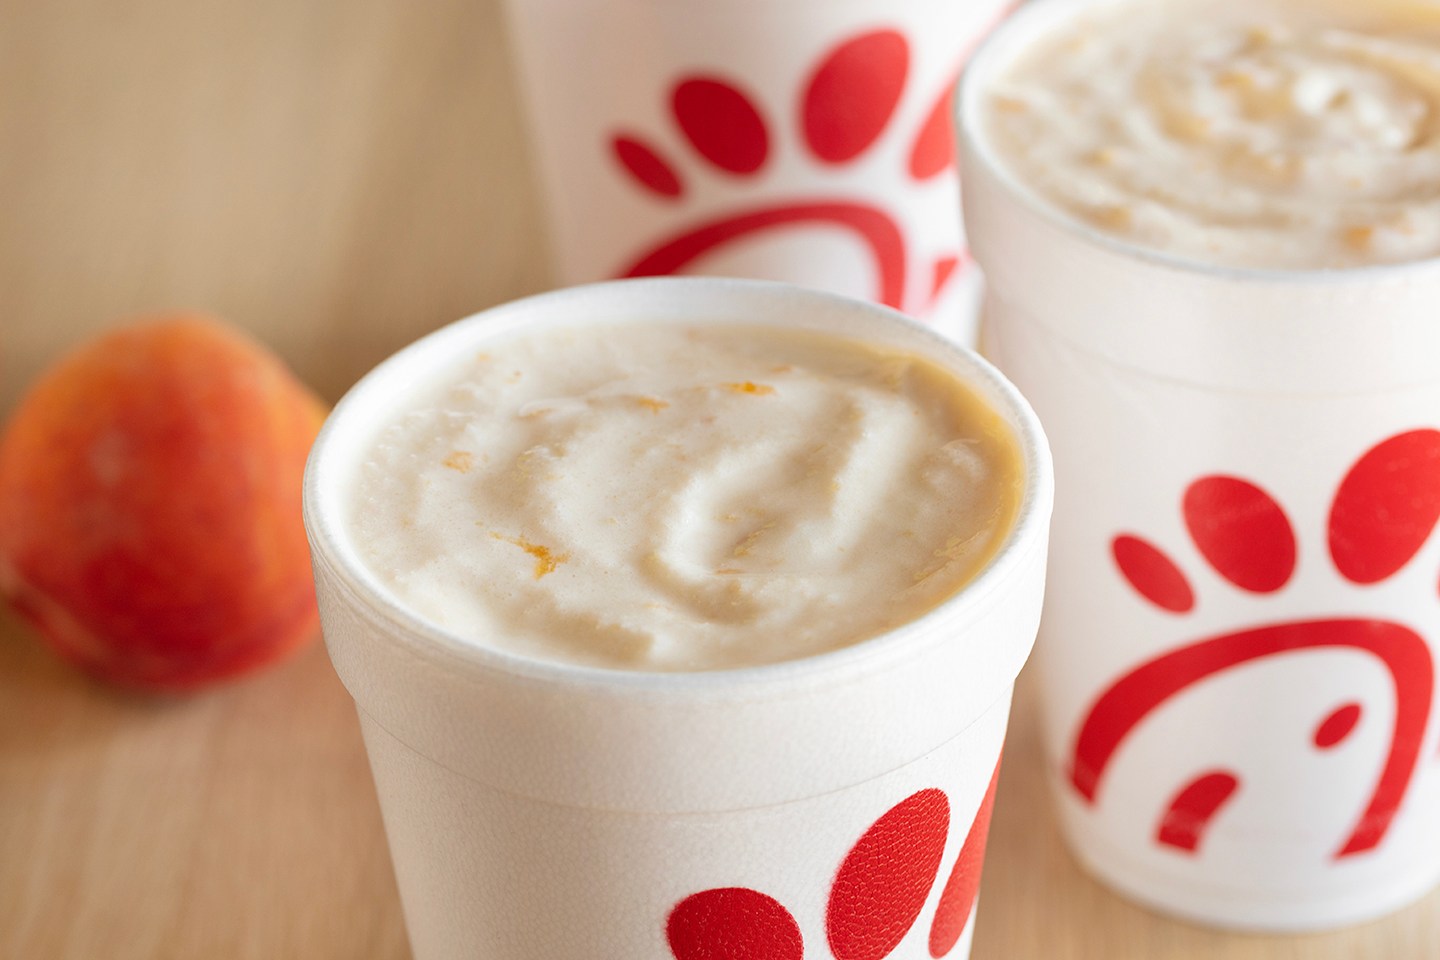 When and where is the Peach Milkshake available? ChickfilA